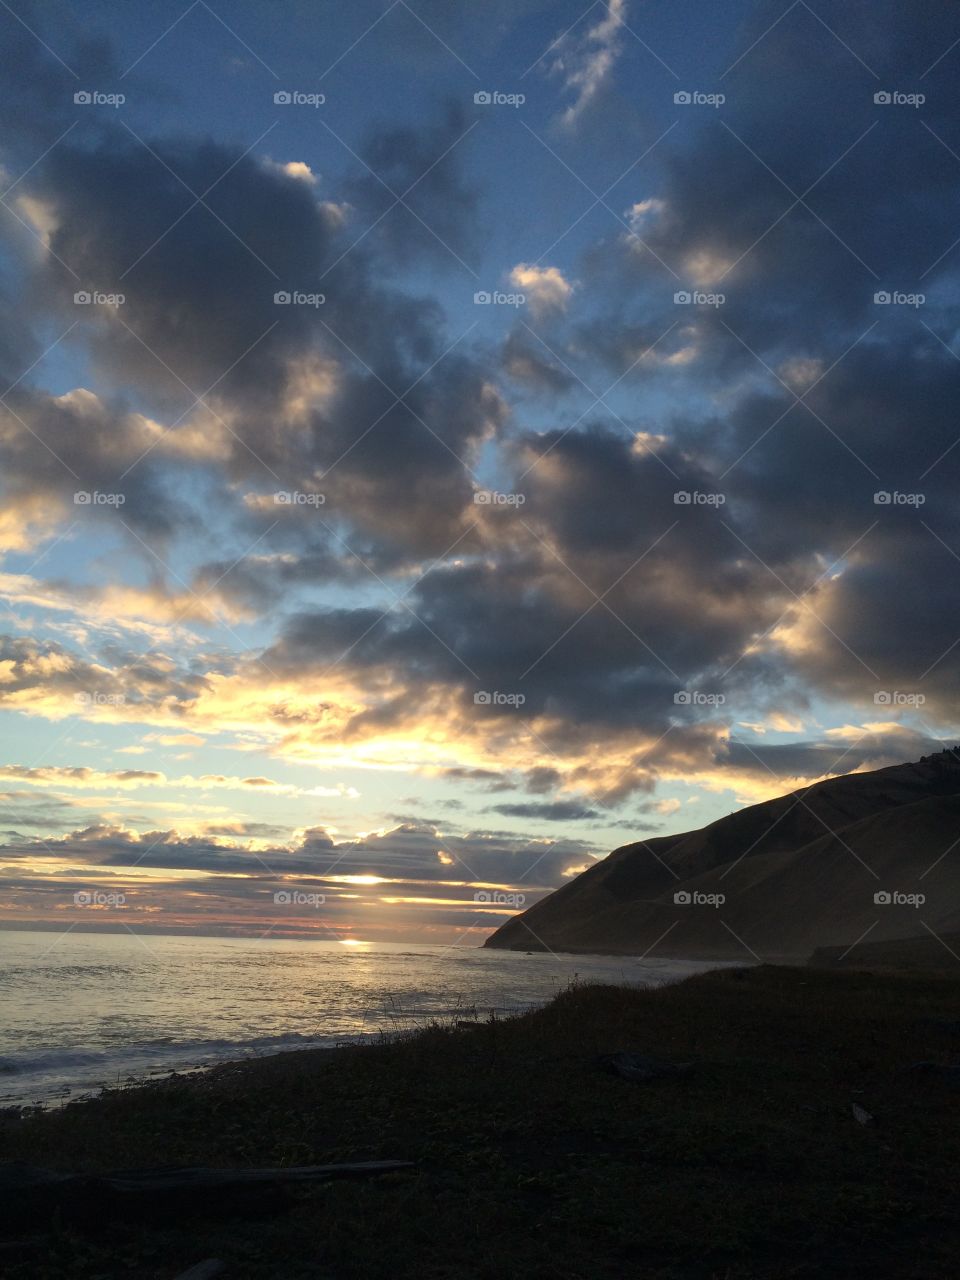 Inspirational sunset on the lost coast trail in California 